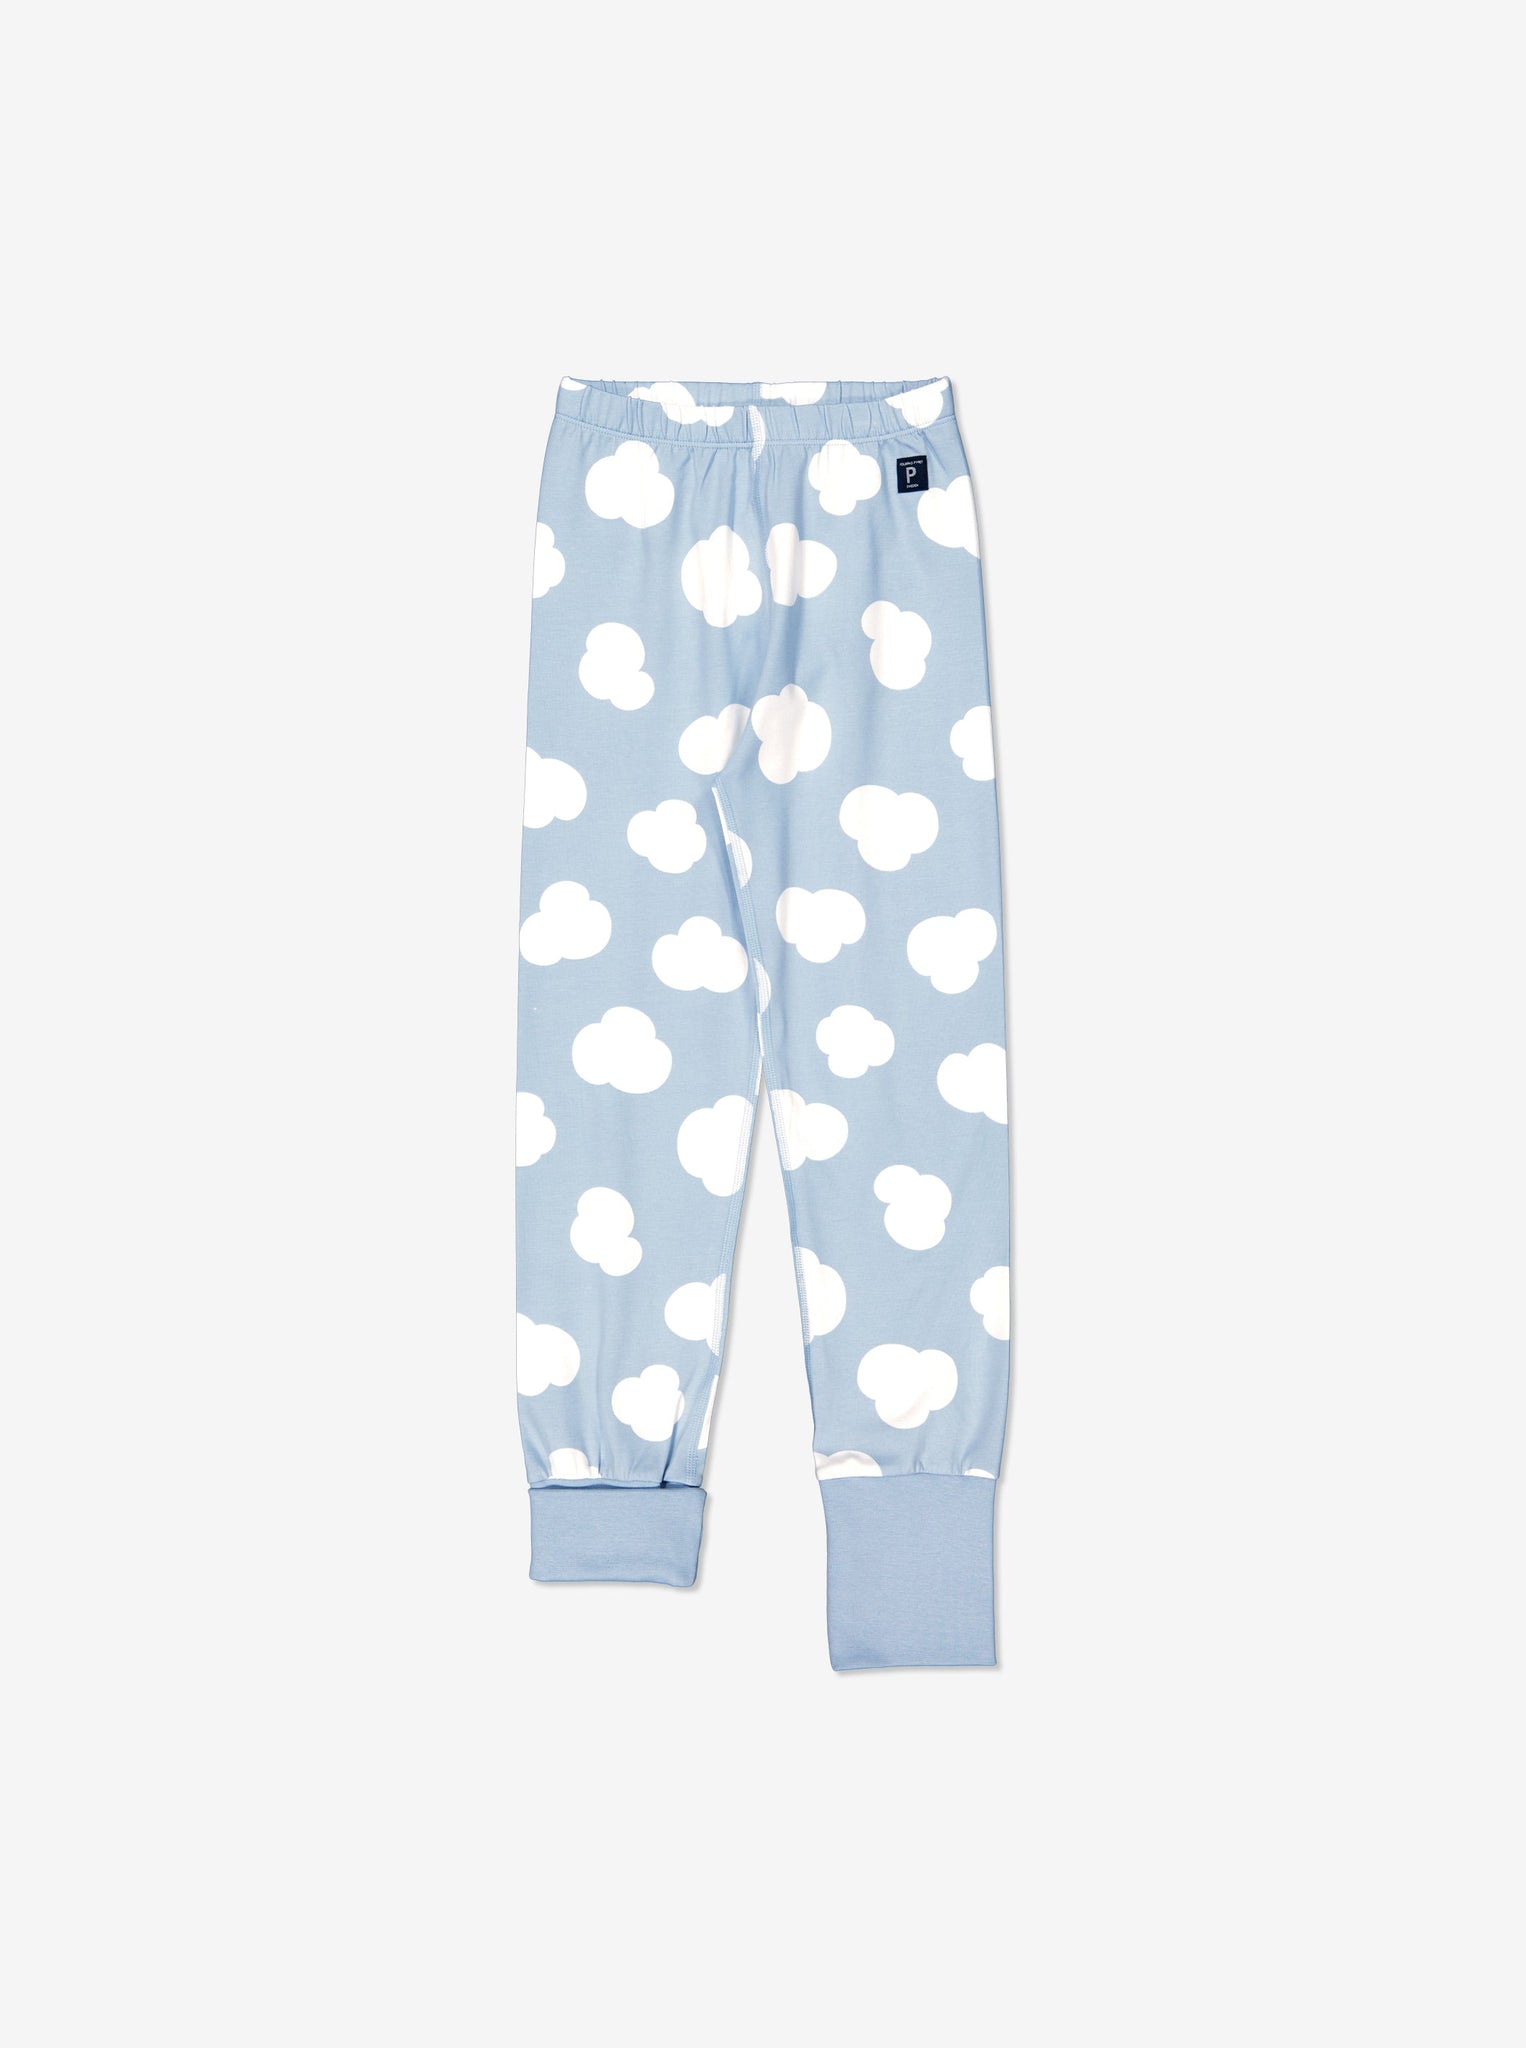  Cotton Cloud Print Kids Pyjamas from Polarn O. Pyret Kidswear. Made using ethically sourced materials.